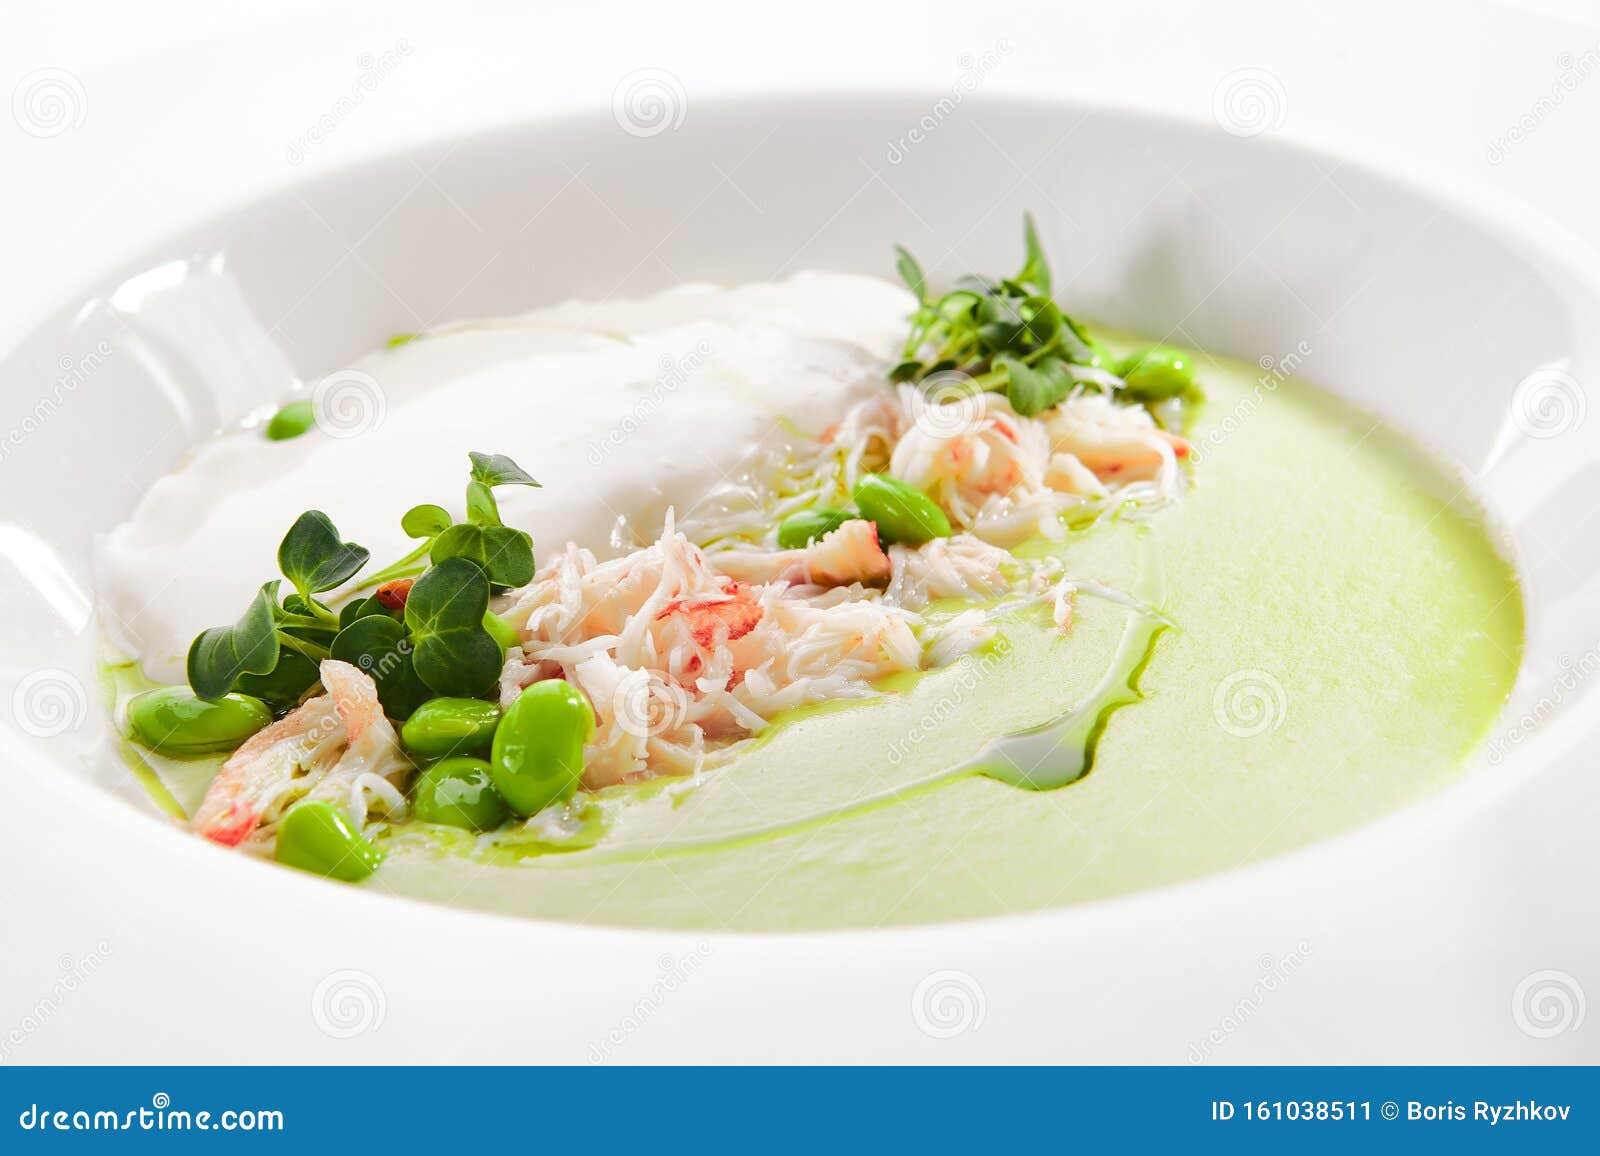 green pea soup with crab and coconut espuma